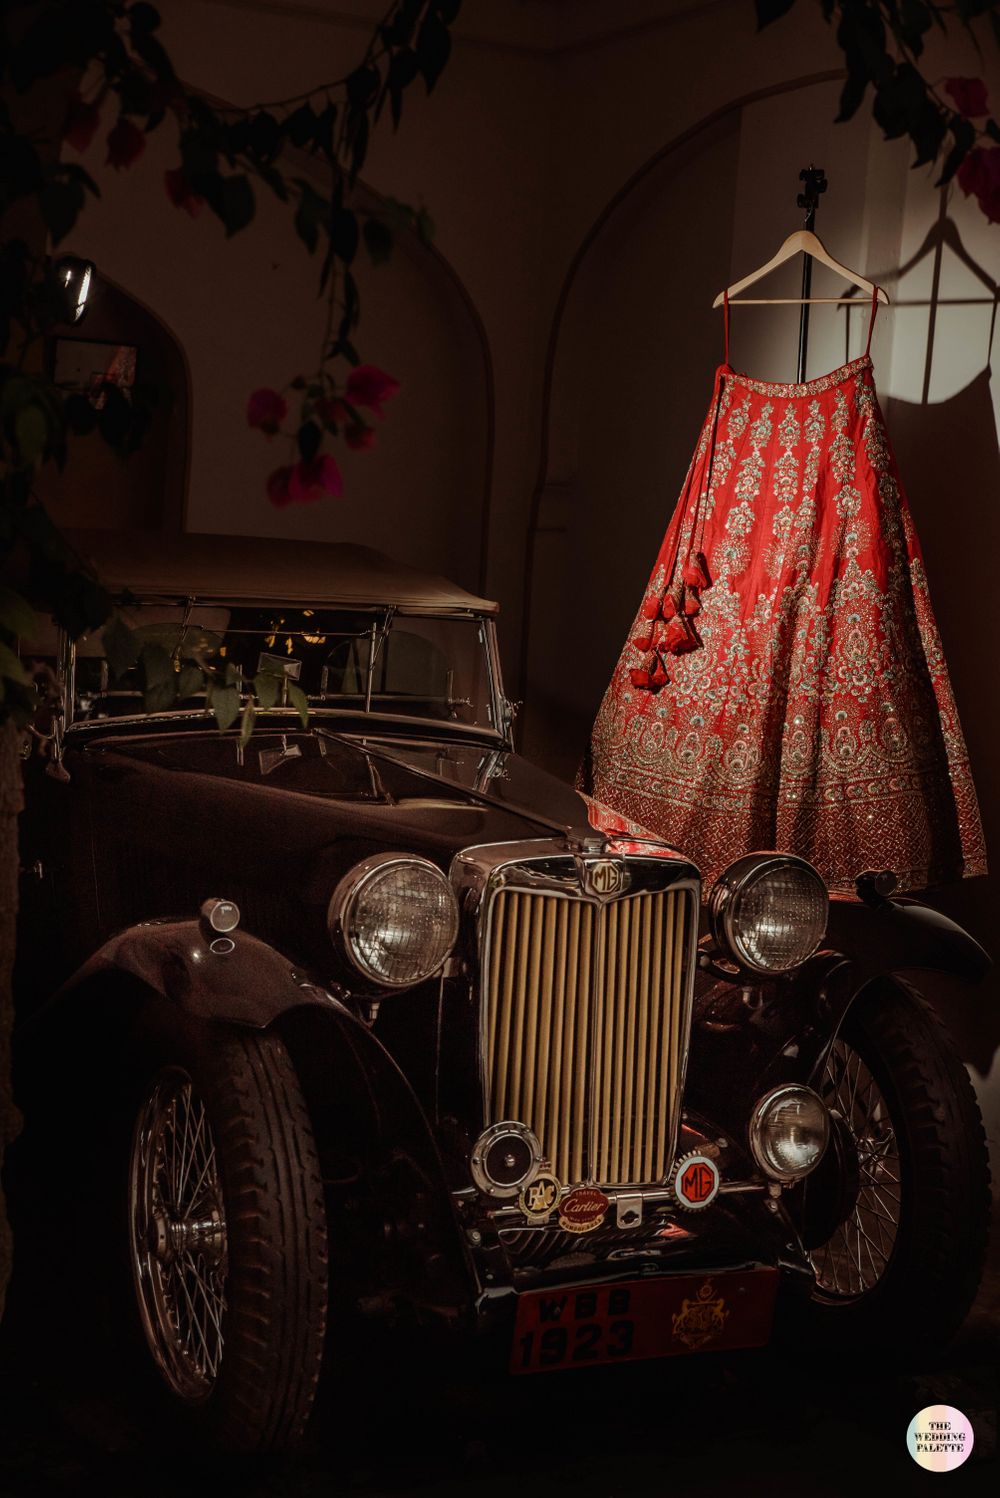 Photo of red bridal lehenga on hanger next to a vintage car